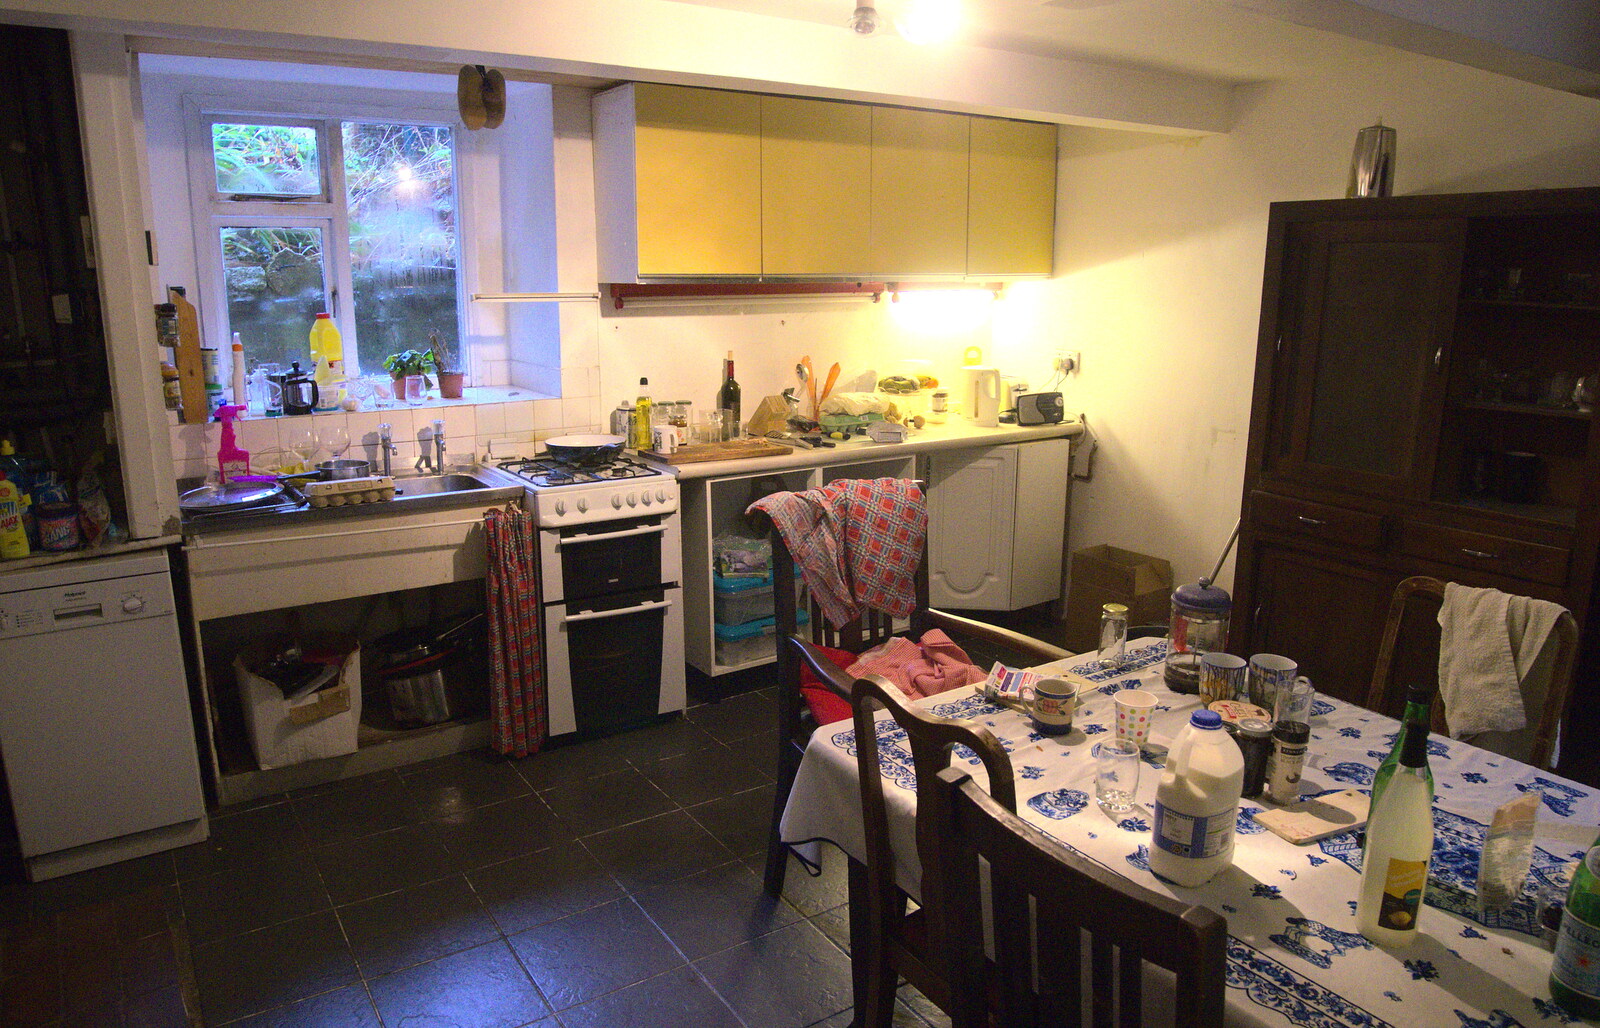 Meanwhile, the kitchen is quiet from Christmas in Blackrock and St. Stephen's in Ballybrack, Dublin, Ireland - 25th December 2015